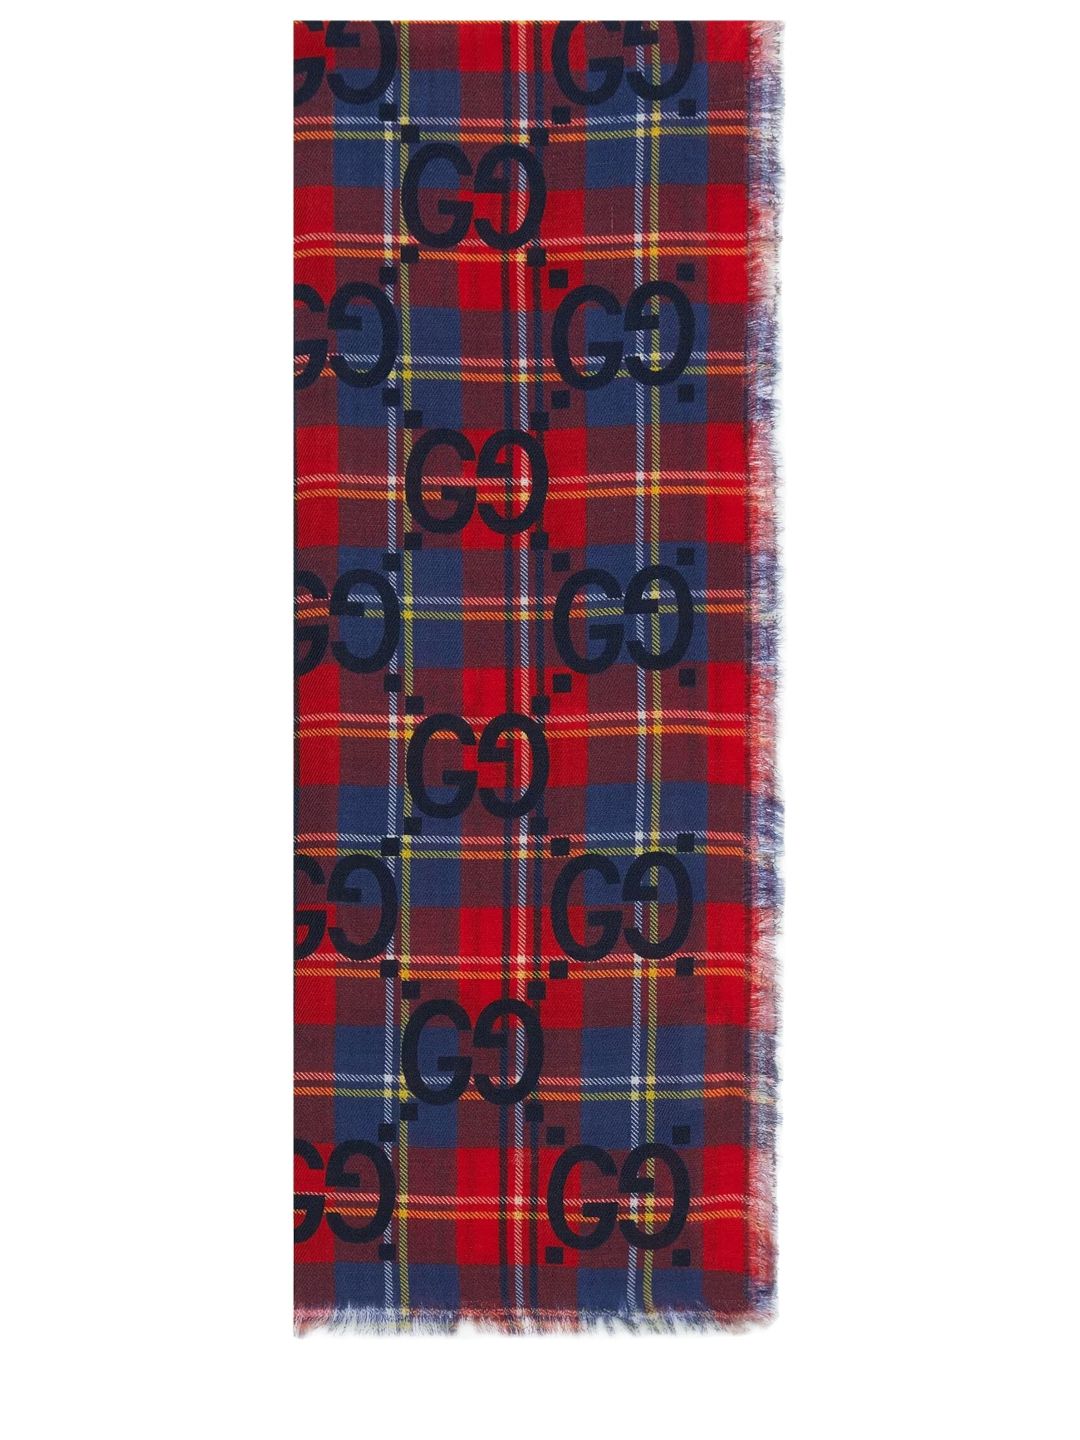 GUCCI Red and Blue Tartan Wool Scarf with Maxi GG Print for Men - FW22